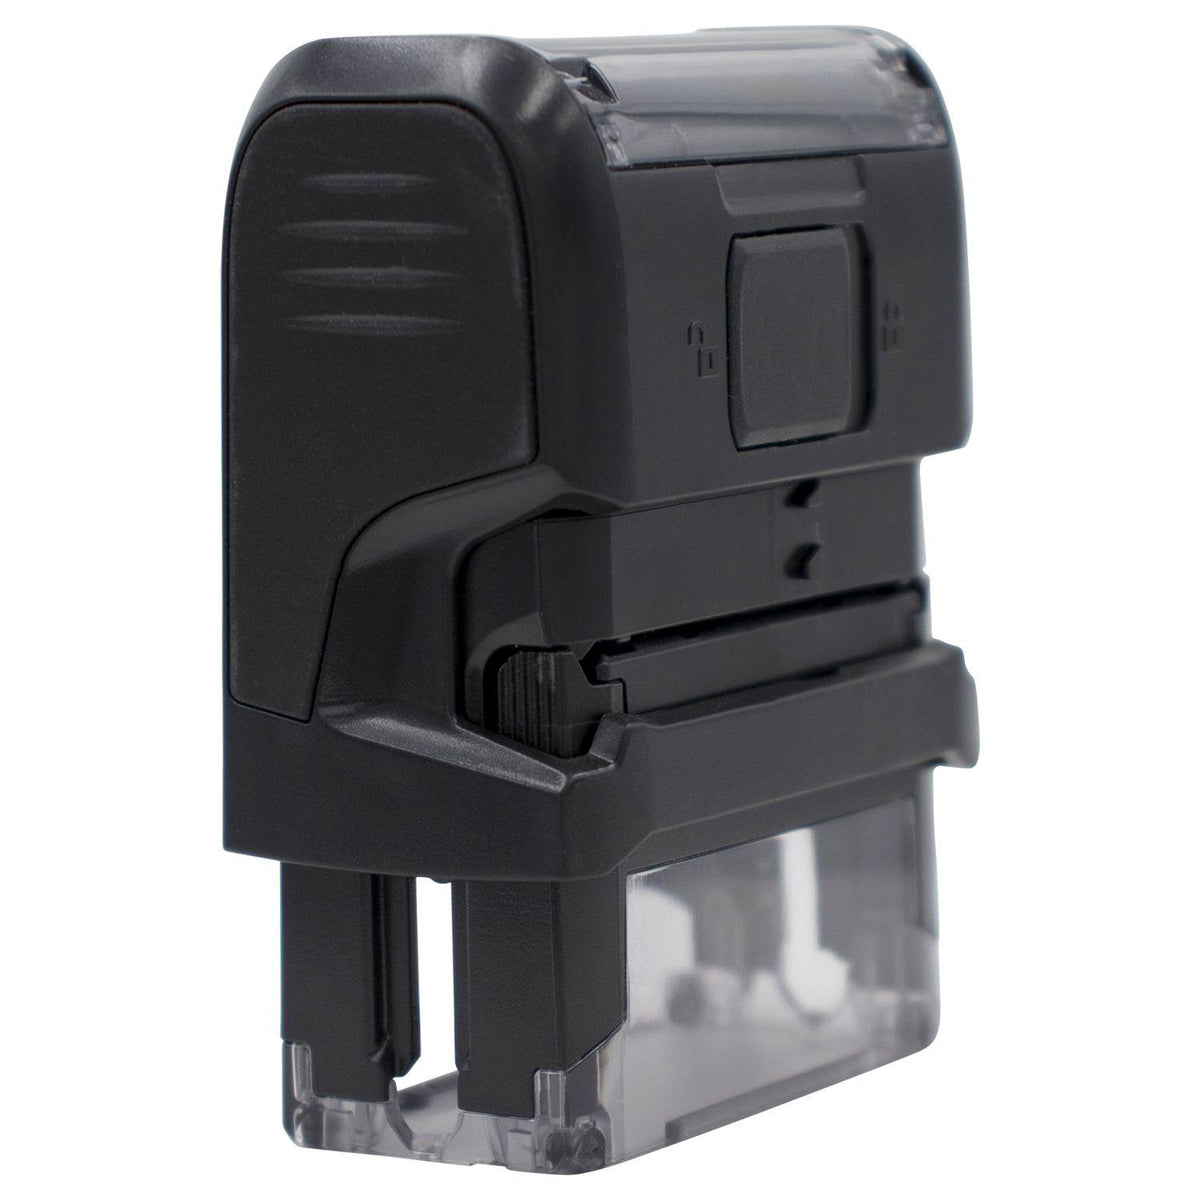 Self-Inking Economy Mail Stamp - Engineer Seal Stamps - Brand_Trodat, Impression Size_Small, Stamp Type_Self-Inking Stamp, Type of Use_Postal &amp; Mailing